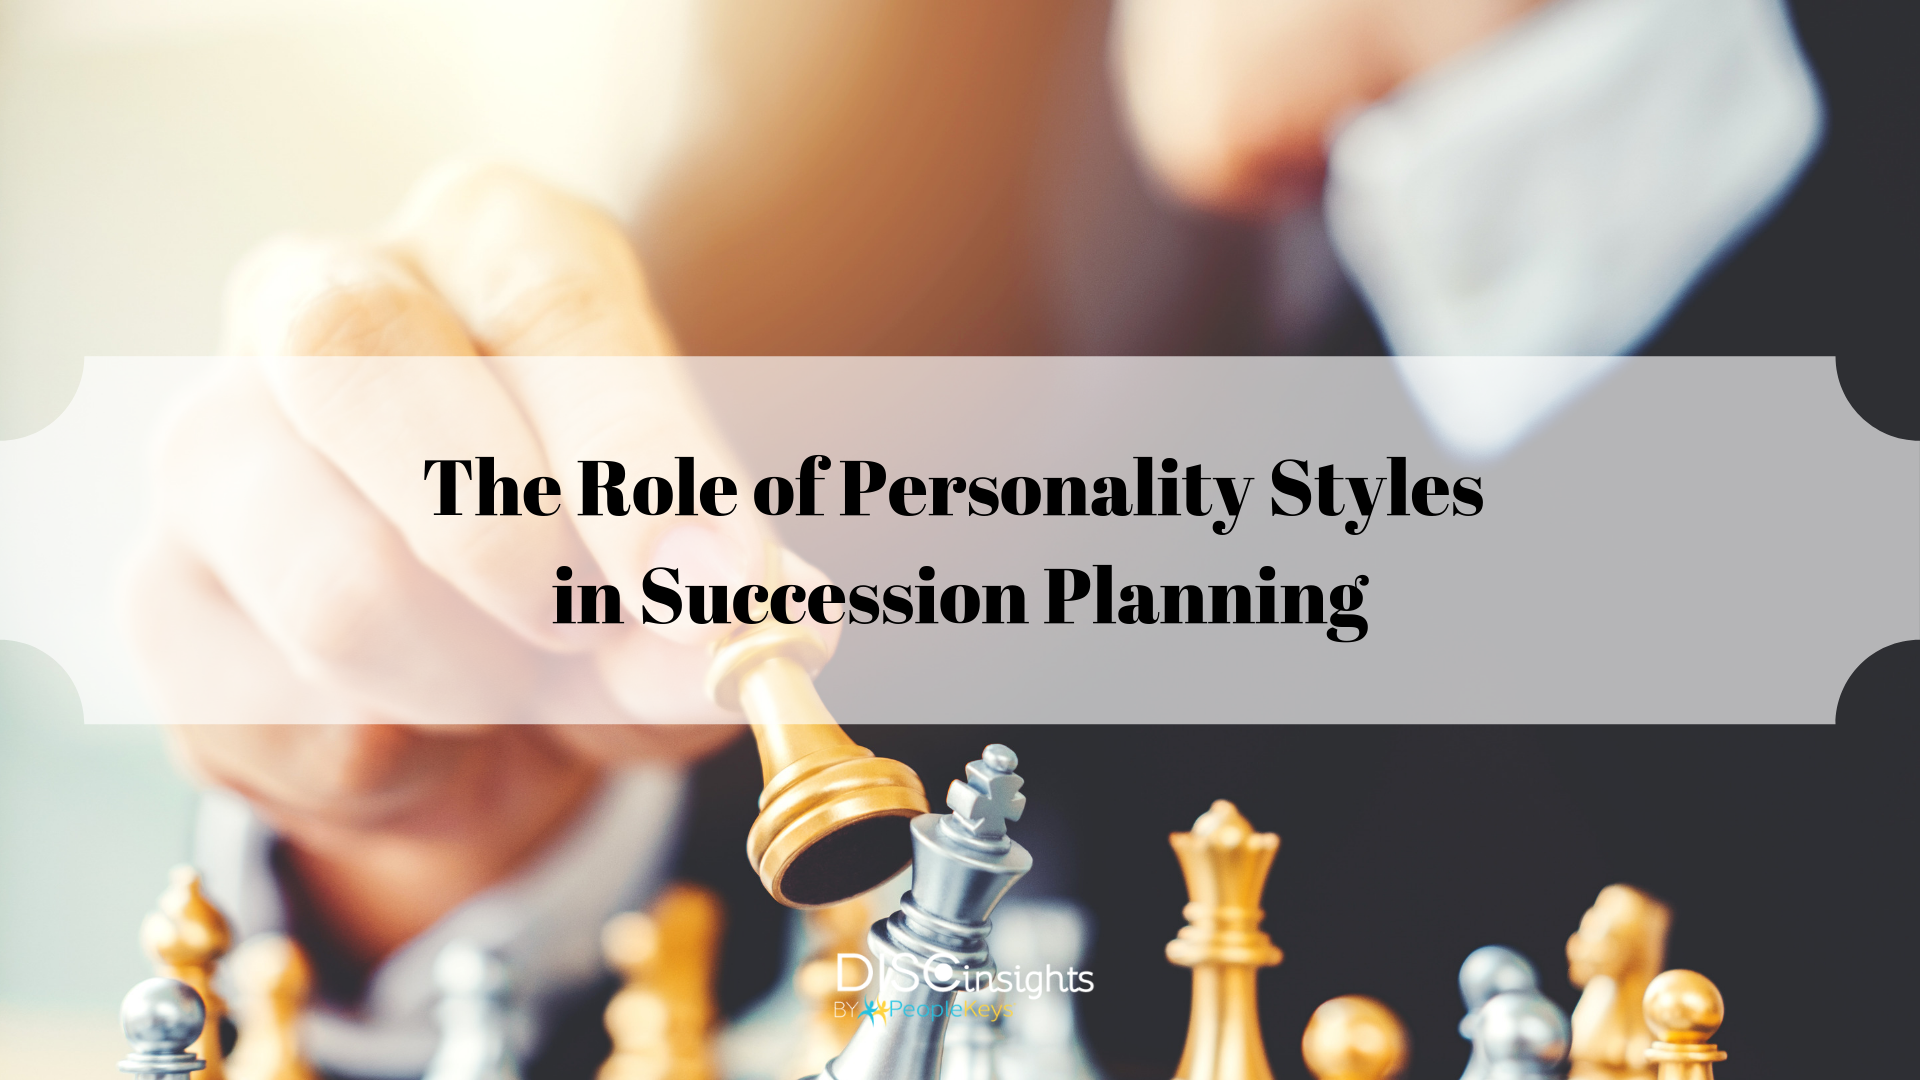 The Role of Personality Styles in Succession Planning